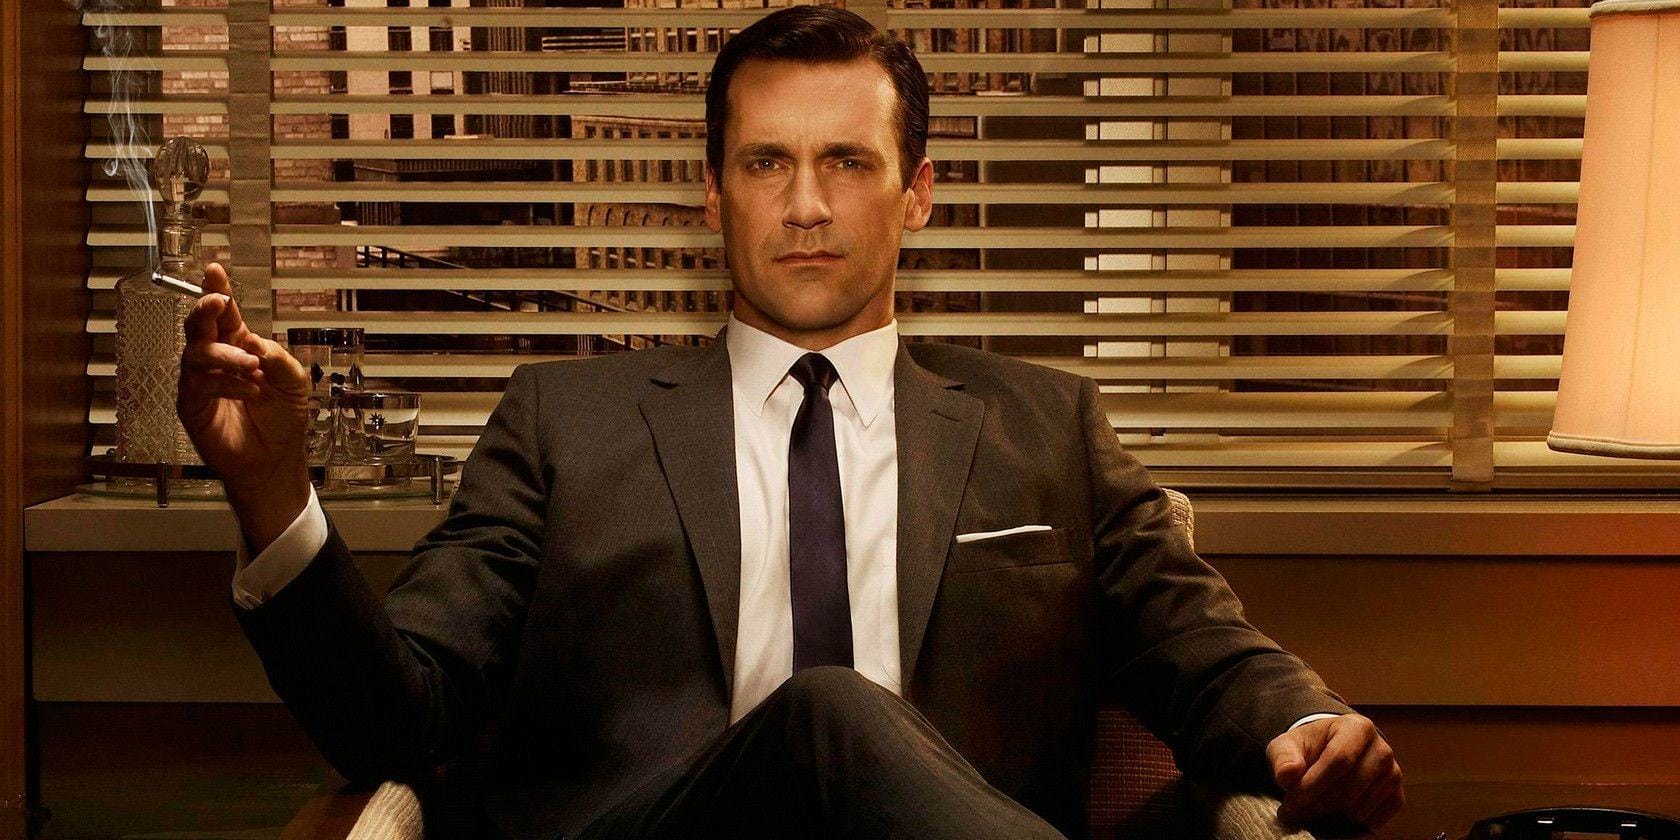 Mad Men's Don Draper sat on his chair